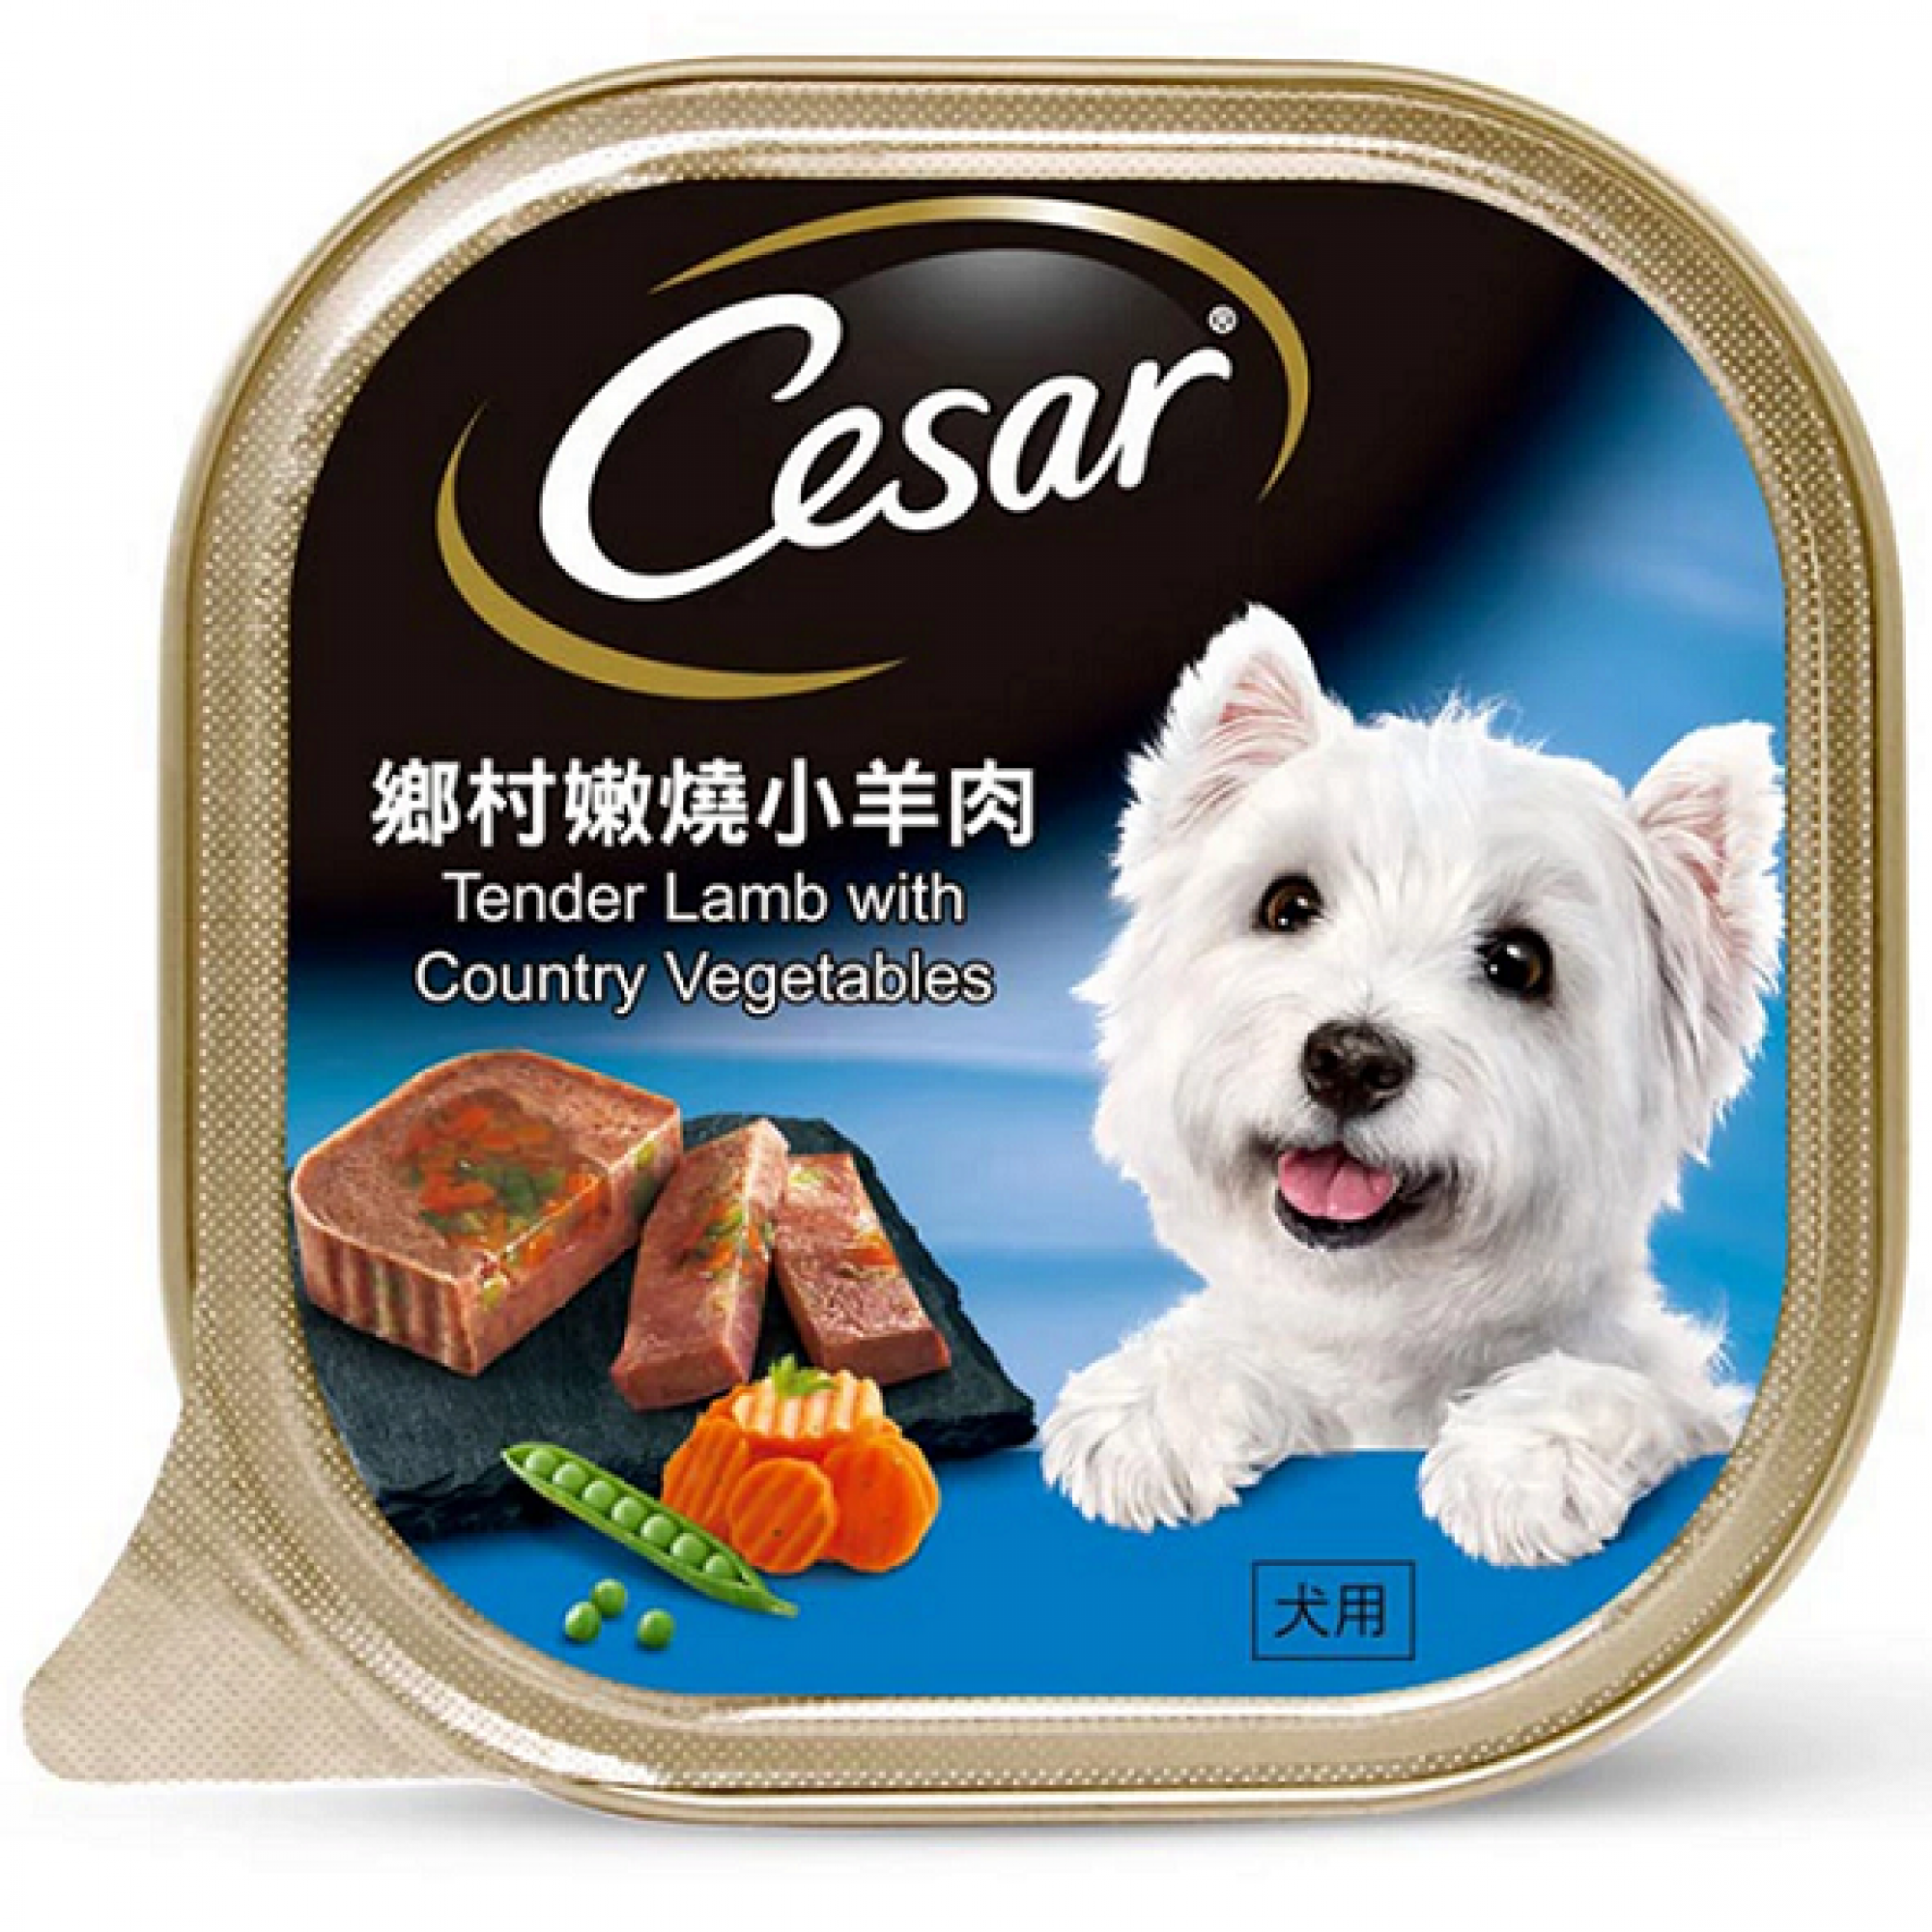 Cesar - Tender Lamb with Country Vegetables Pate Dog Food 100g